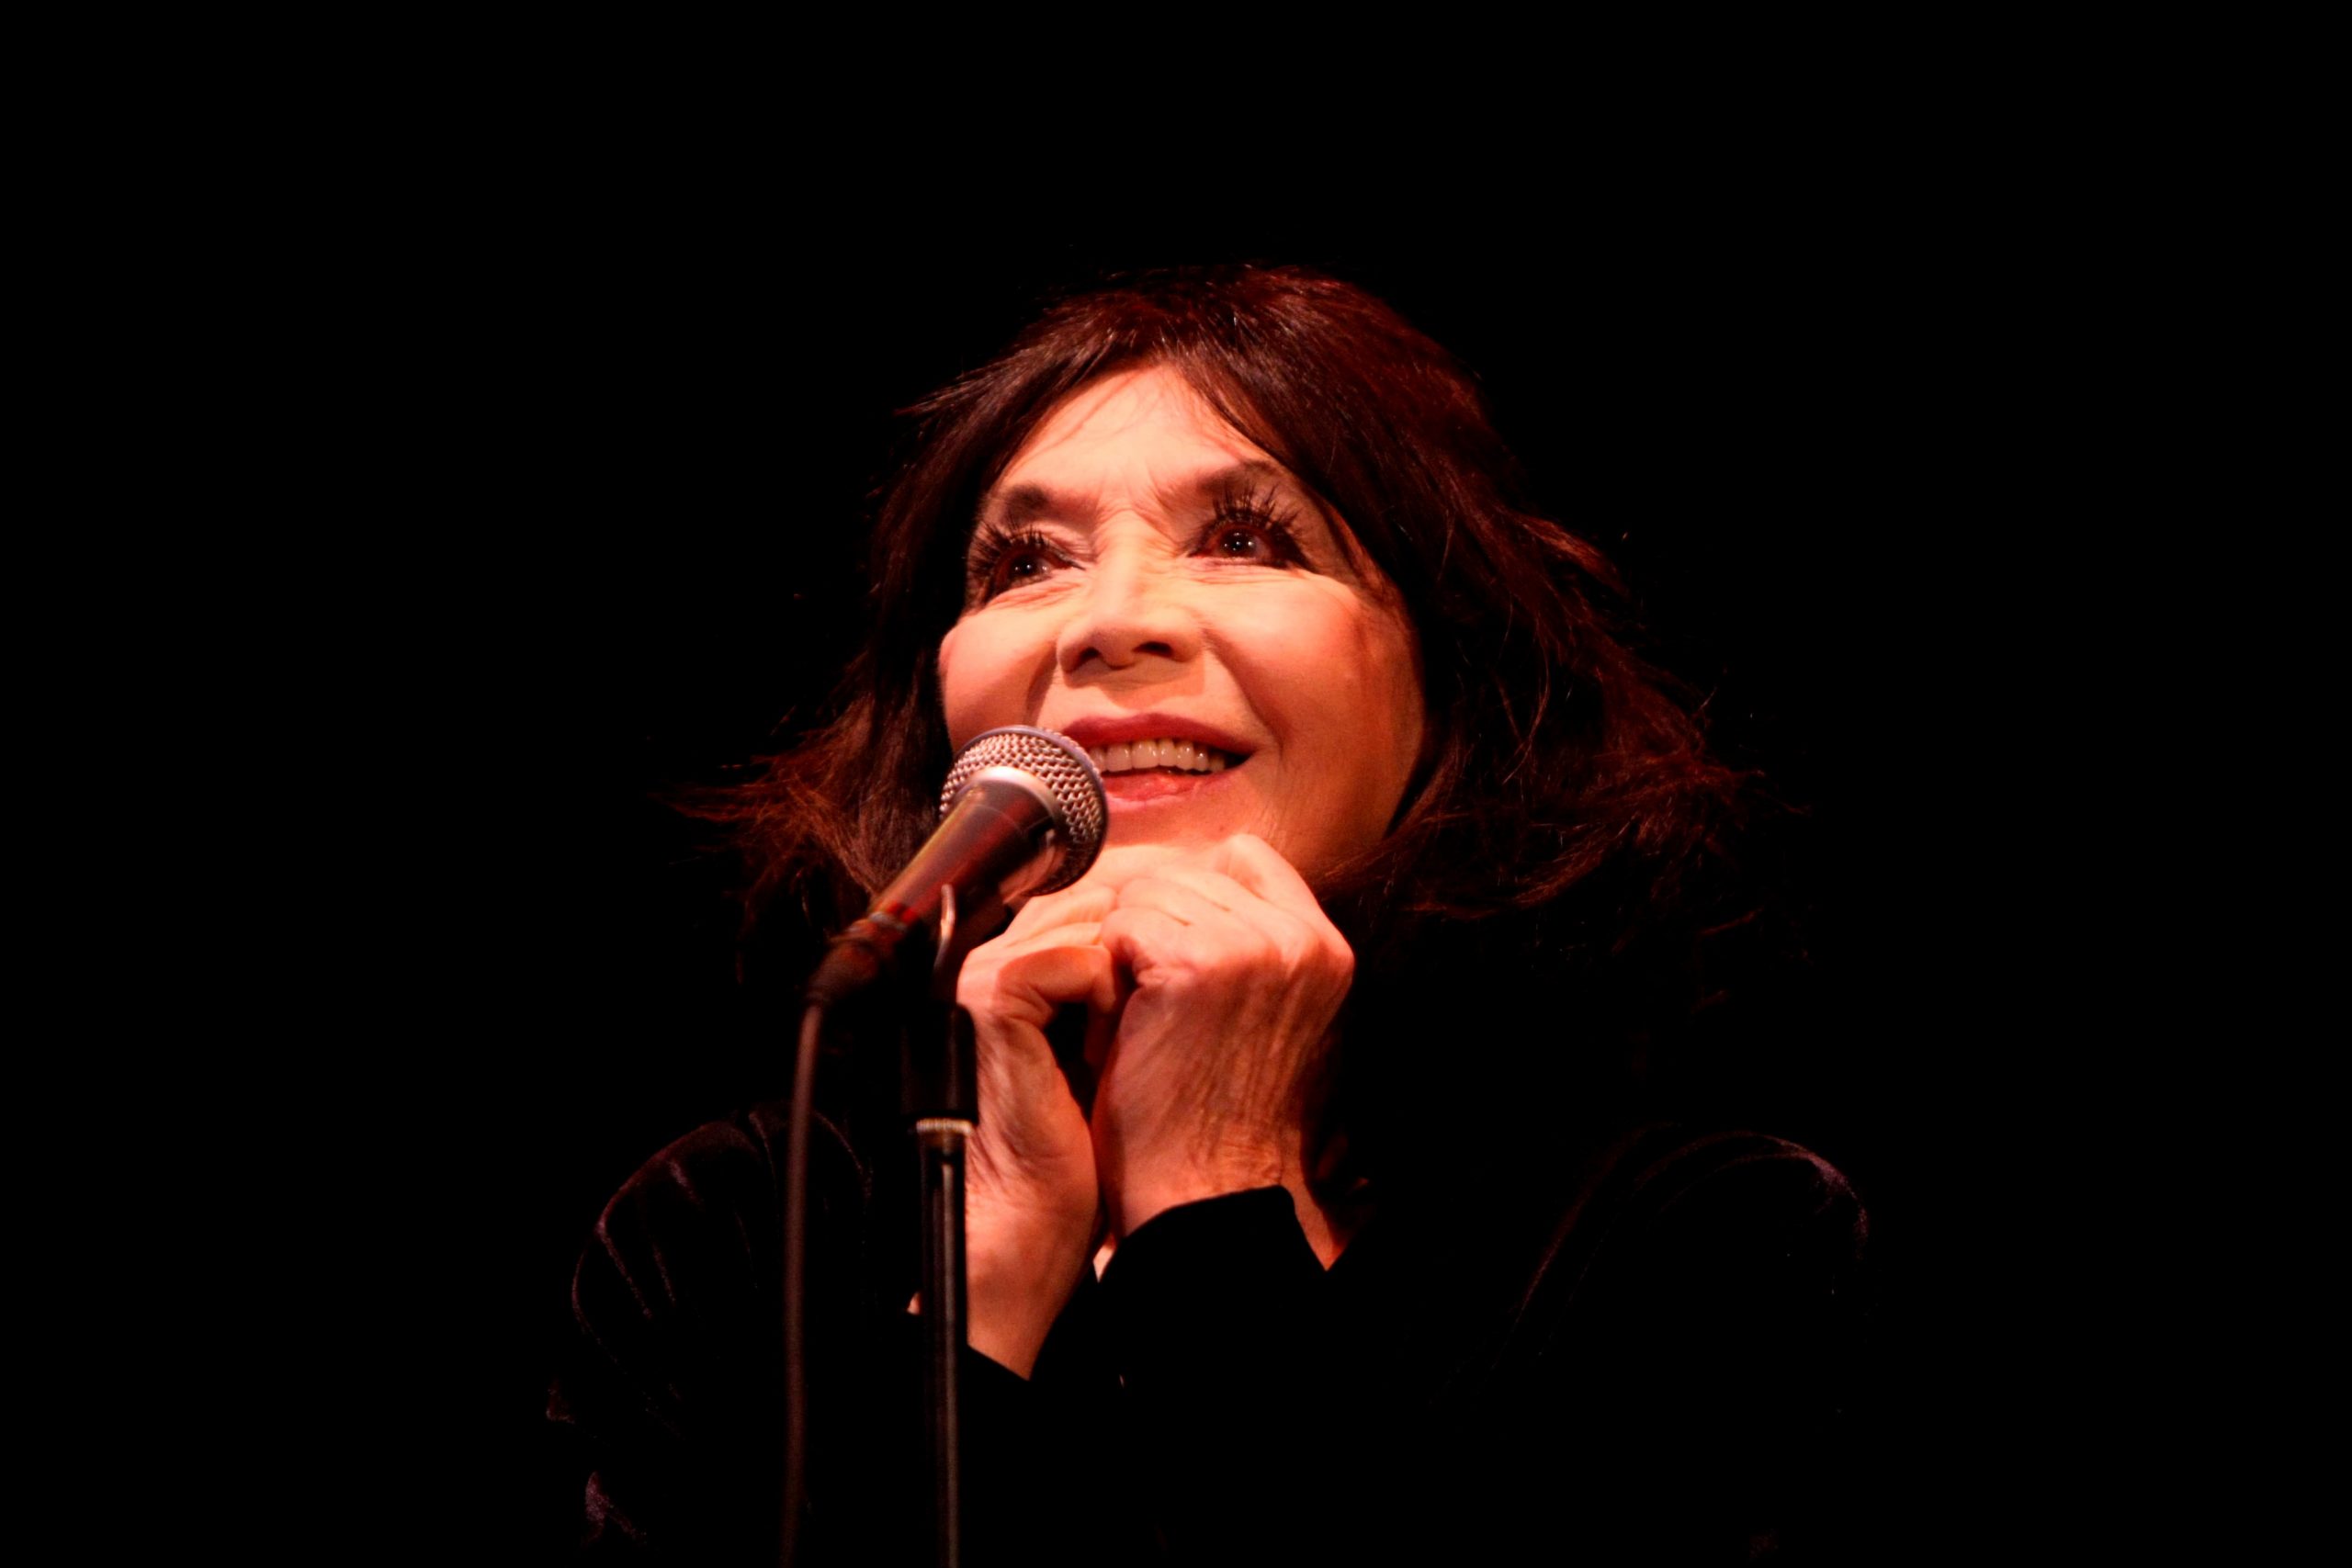 epa08691653 (FILE) - French actress and songster Juliette Greco performs in Warsaw, Poland, 20 march 2008. According to reports Juliette Greco died aged 93 on 23 September 2020.  EPA/LESZEK SZYMANSKI POLAND OUT